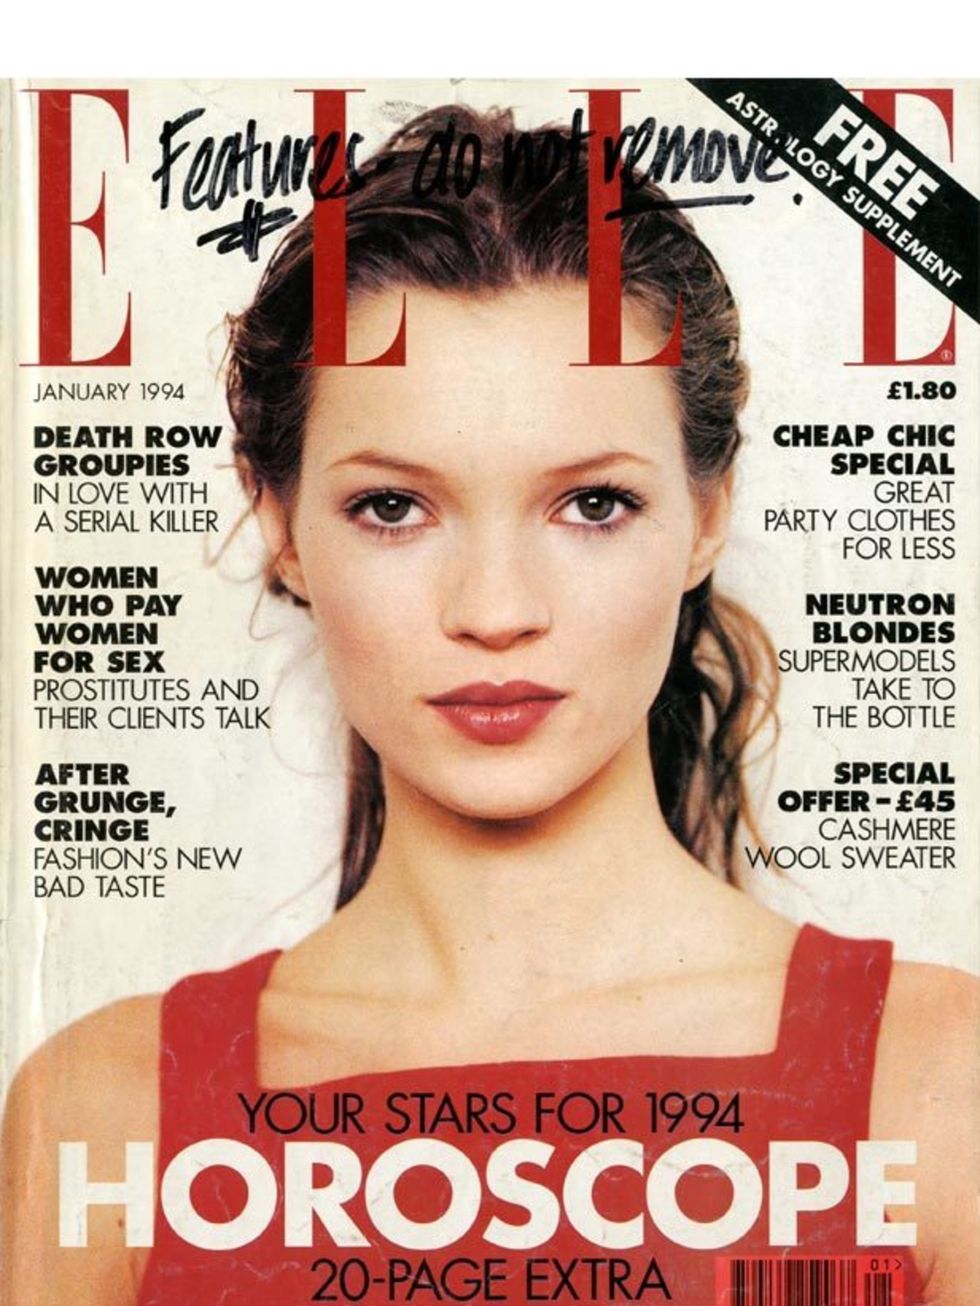 <p><a href="http://www.elleuk.com/starstyle/style-files/%28section%29/Kate-Moss/%28offset%29/0/%28img%29/336138">Kate Moss</a>, January 1994 </p>